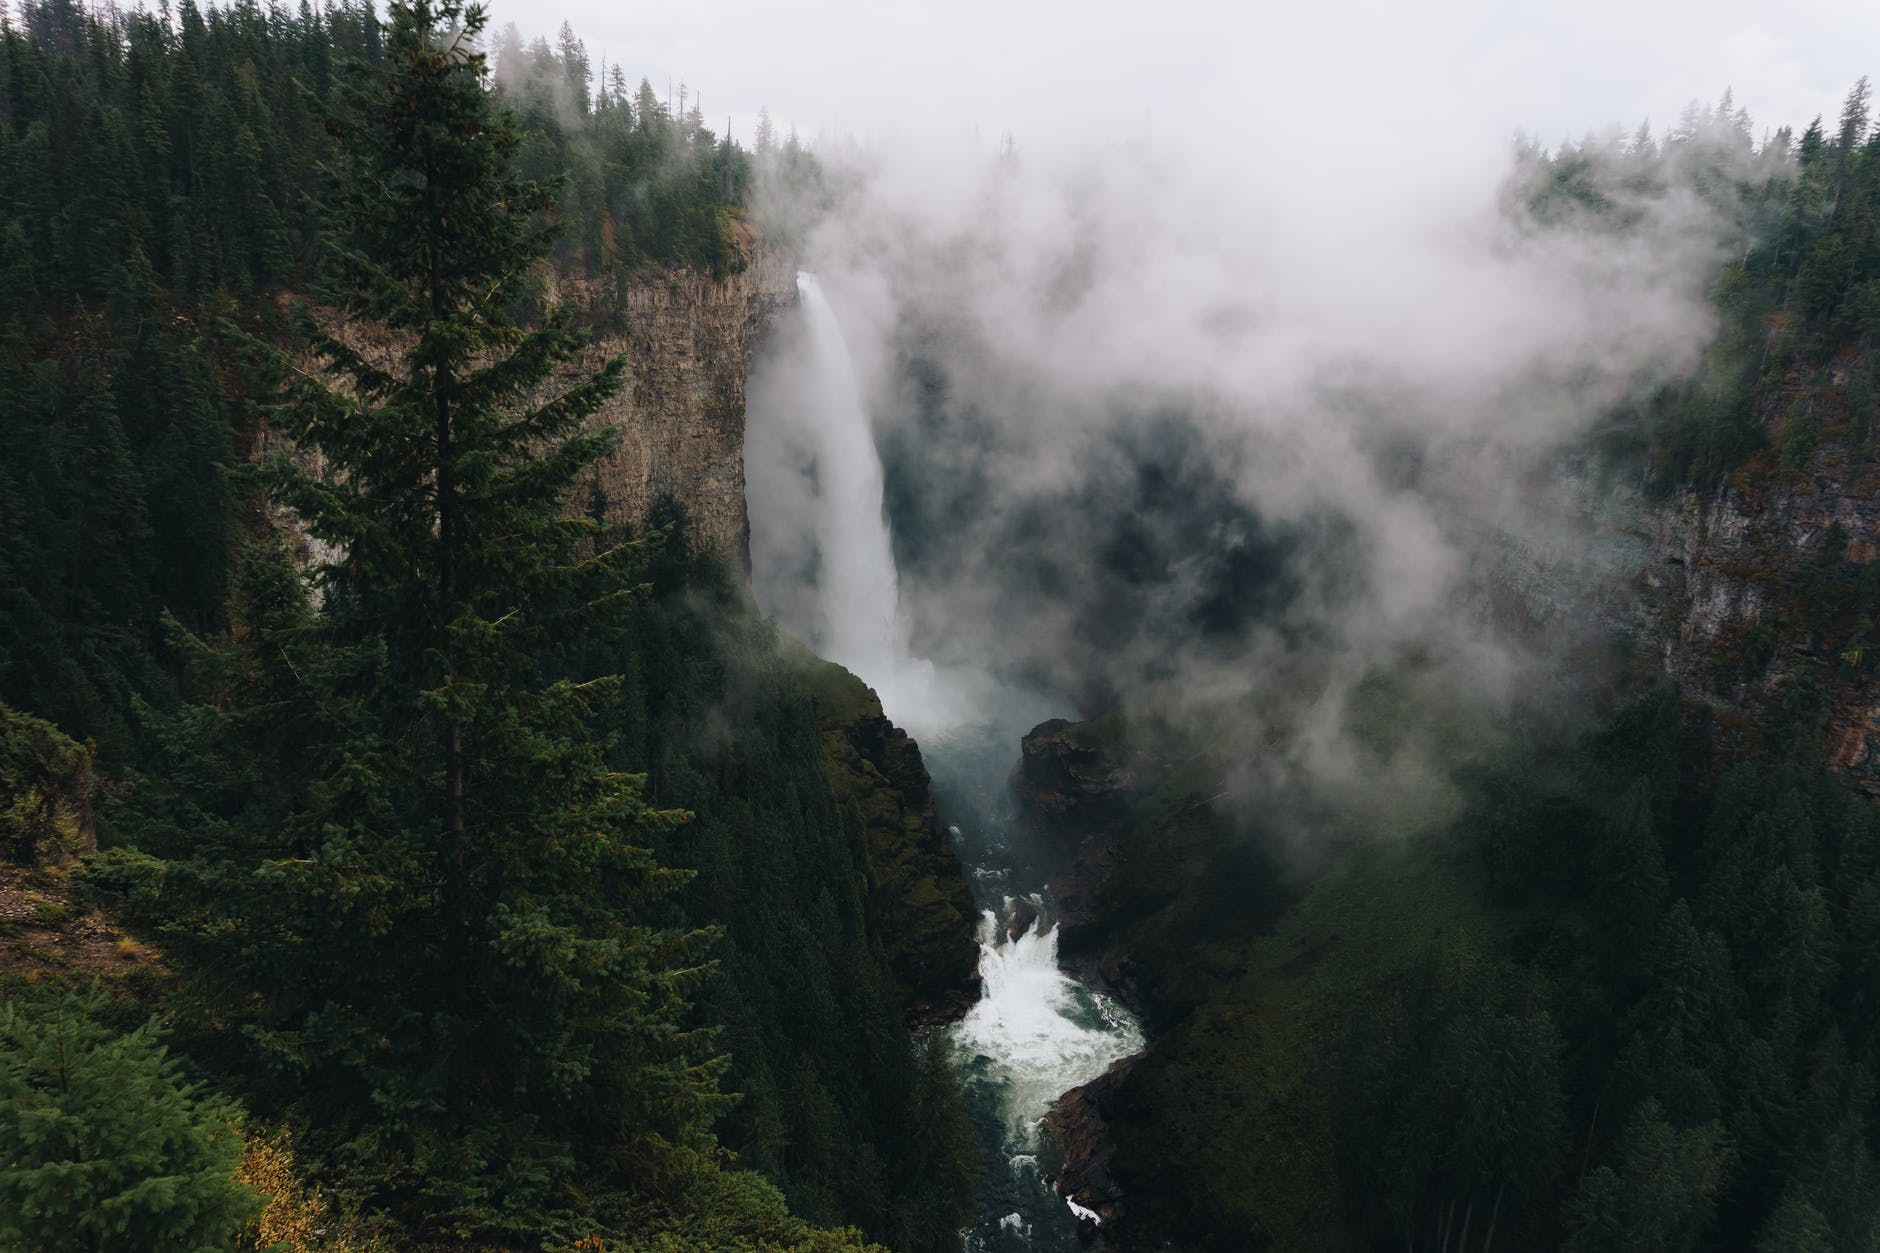 waterfall in mountainous terrain with evergreen forest against cloudy sky